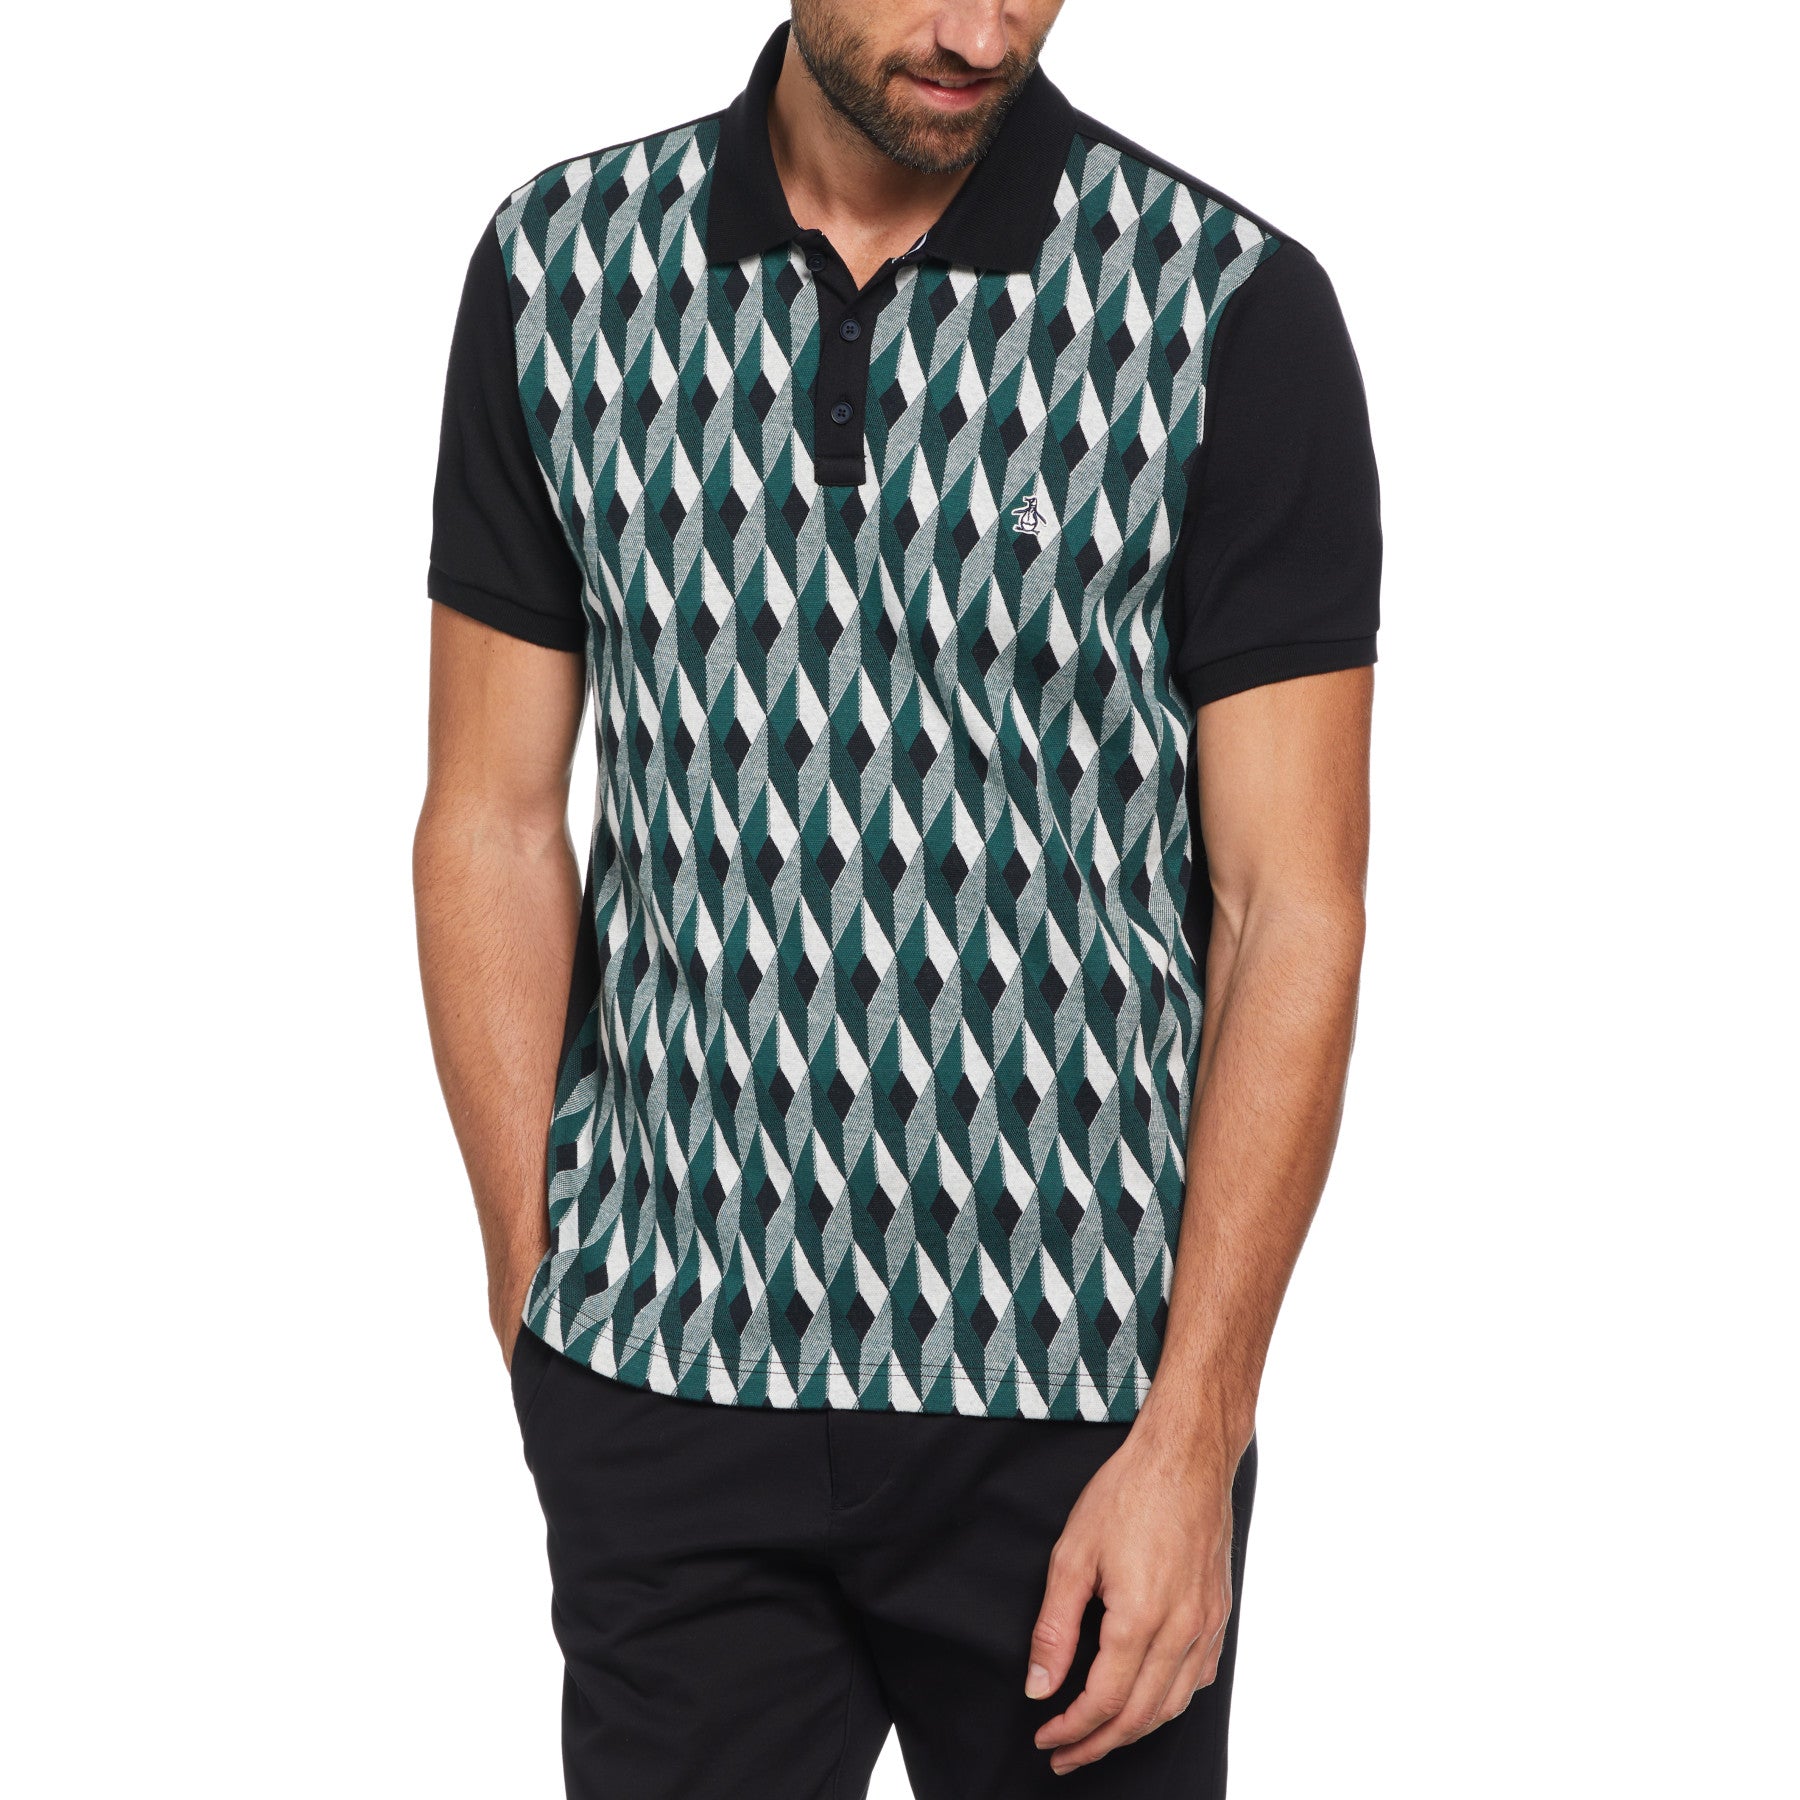 View Jacquard Front Diamond Geo Print Polo Shirt In June Bug information